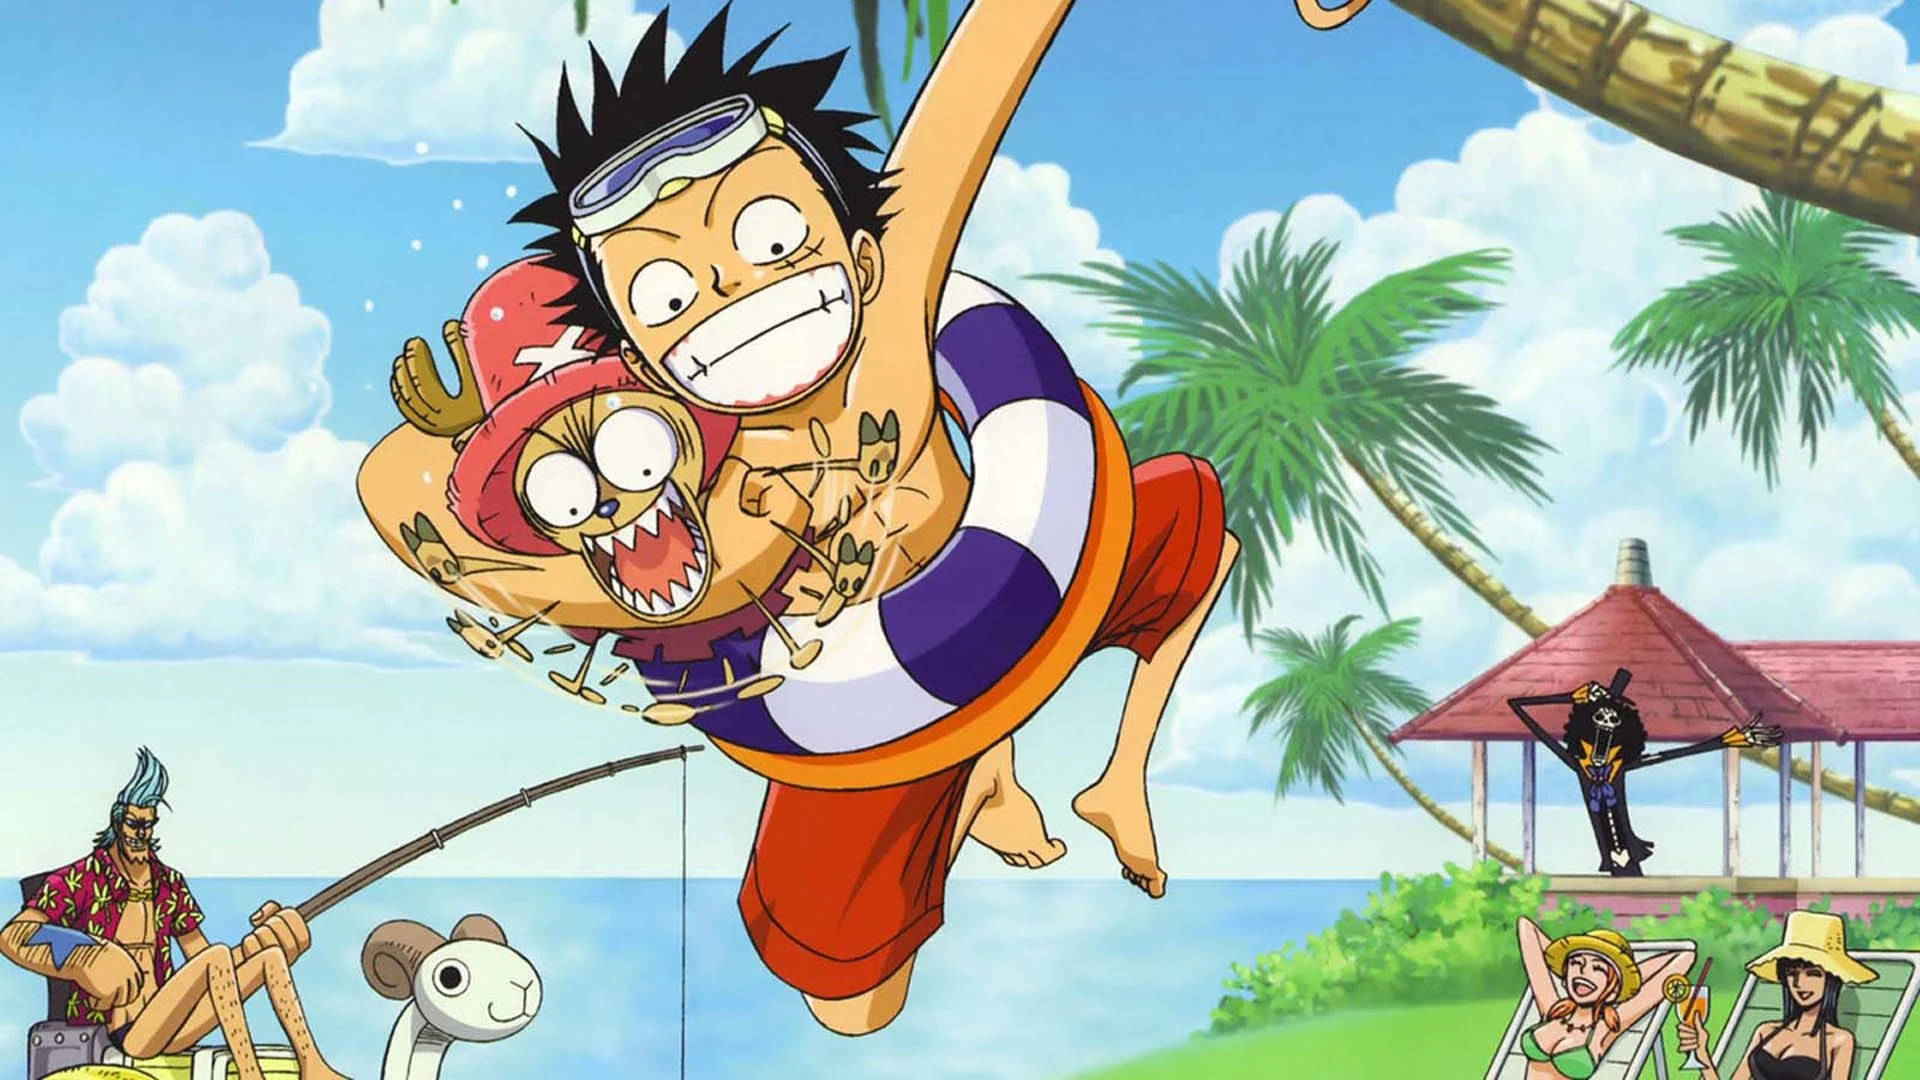 Funny Anime One Piece Pirate Crew Background